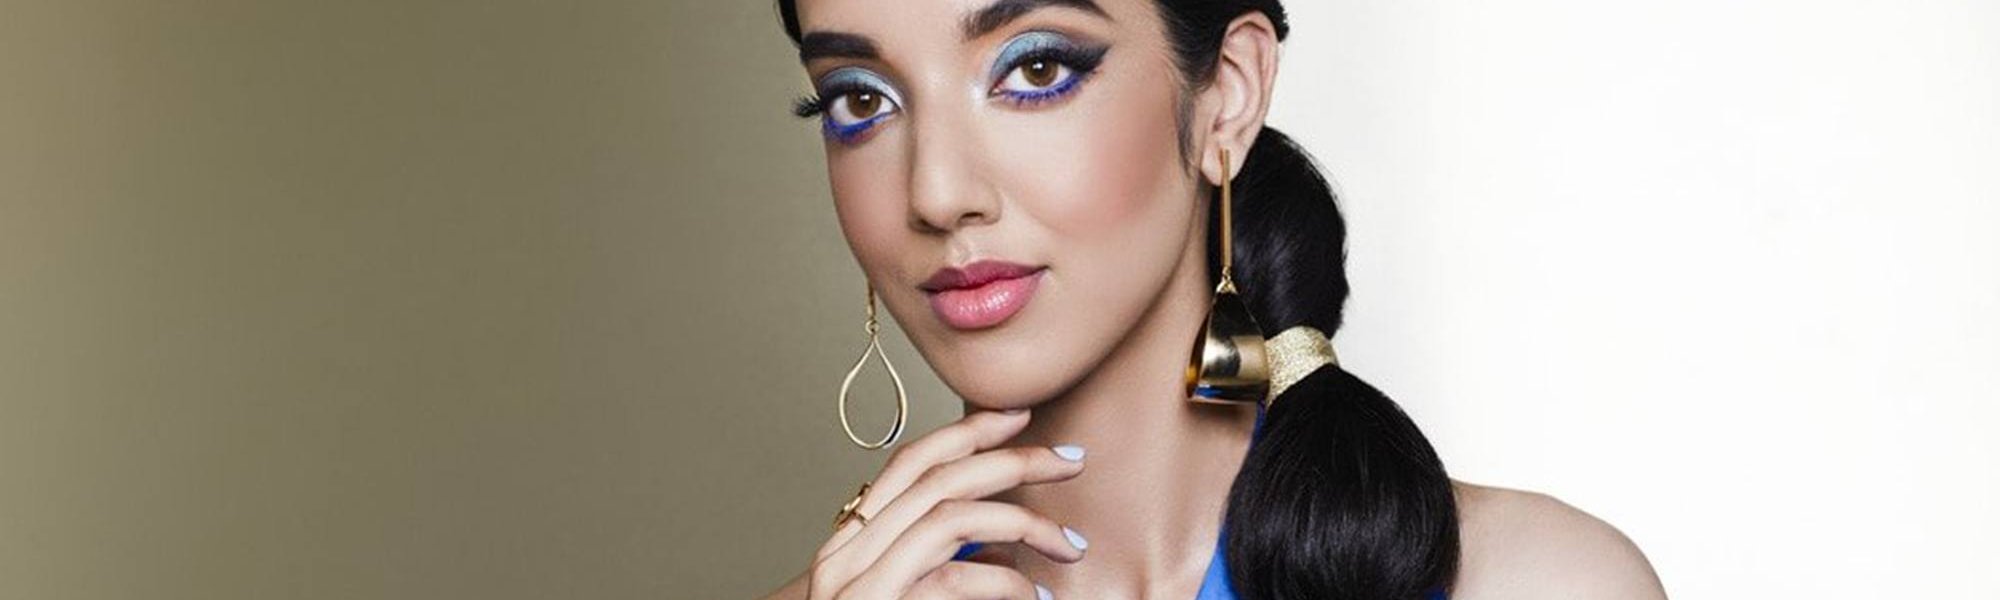 Get The Look Mystical Genie Hair And Makeup For Halloween